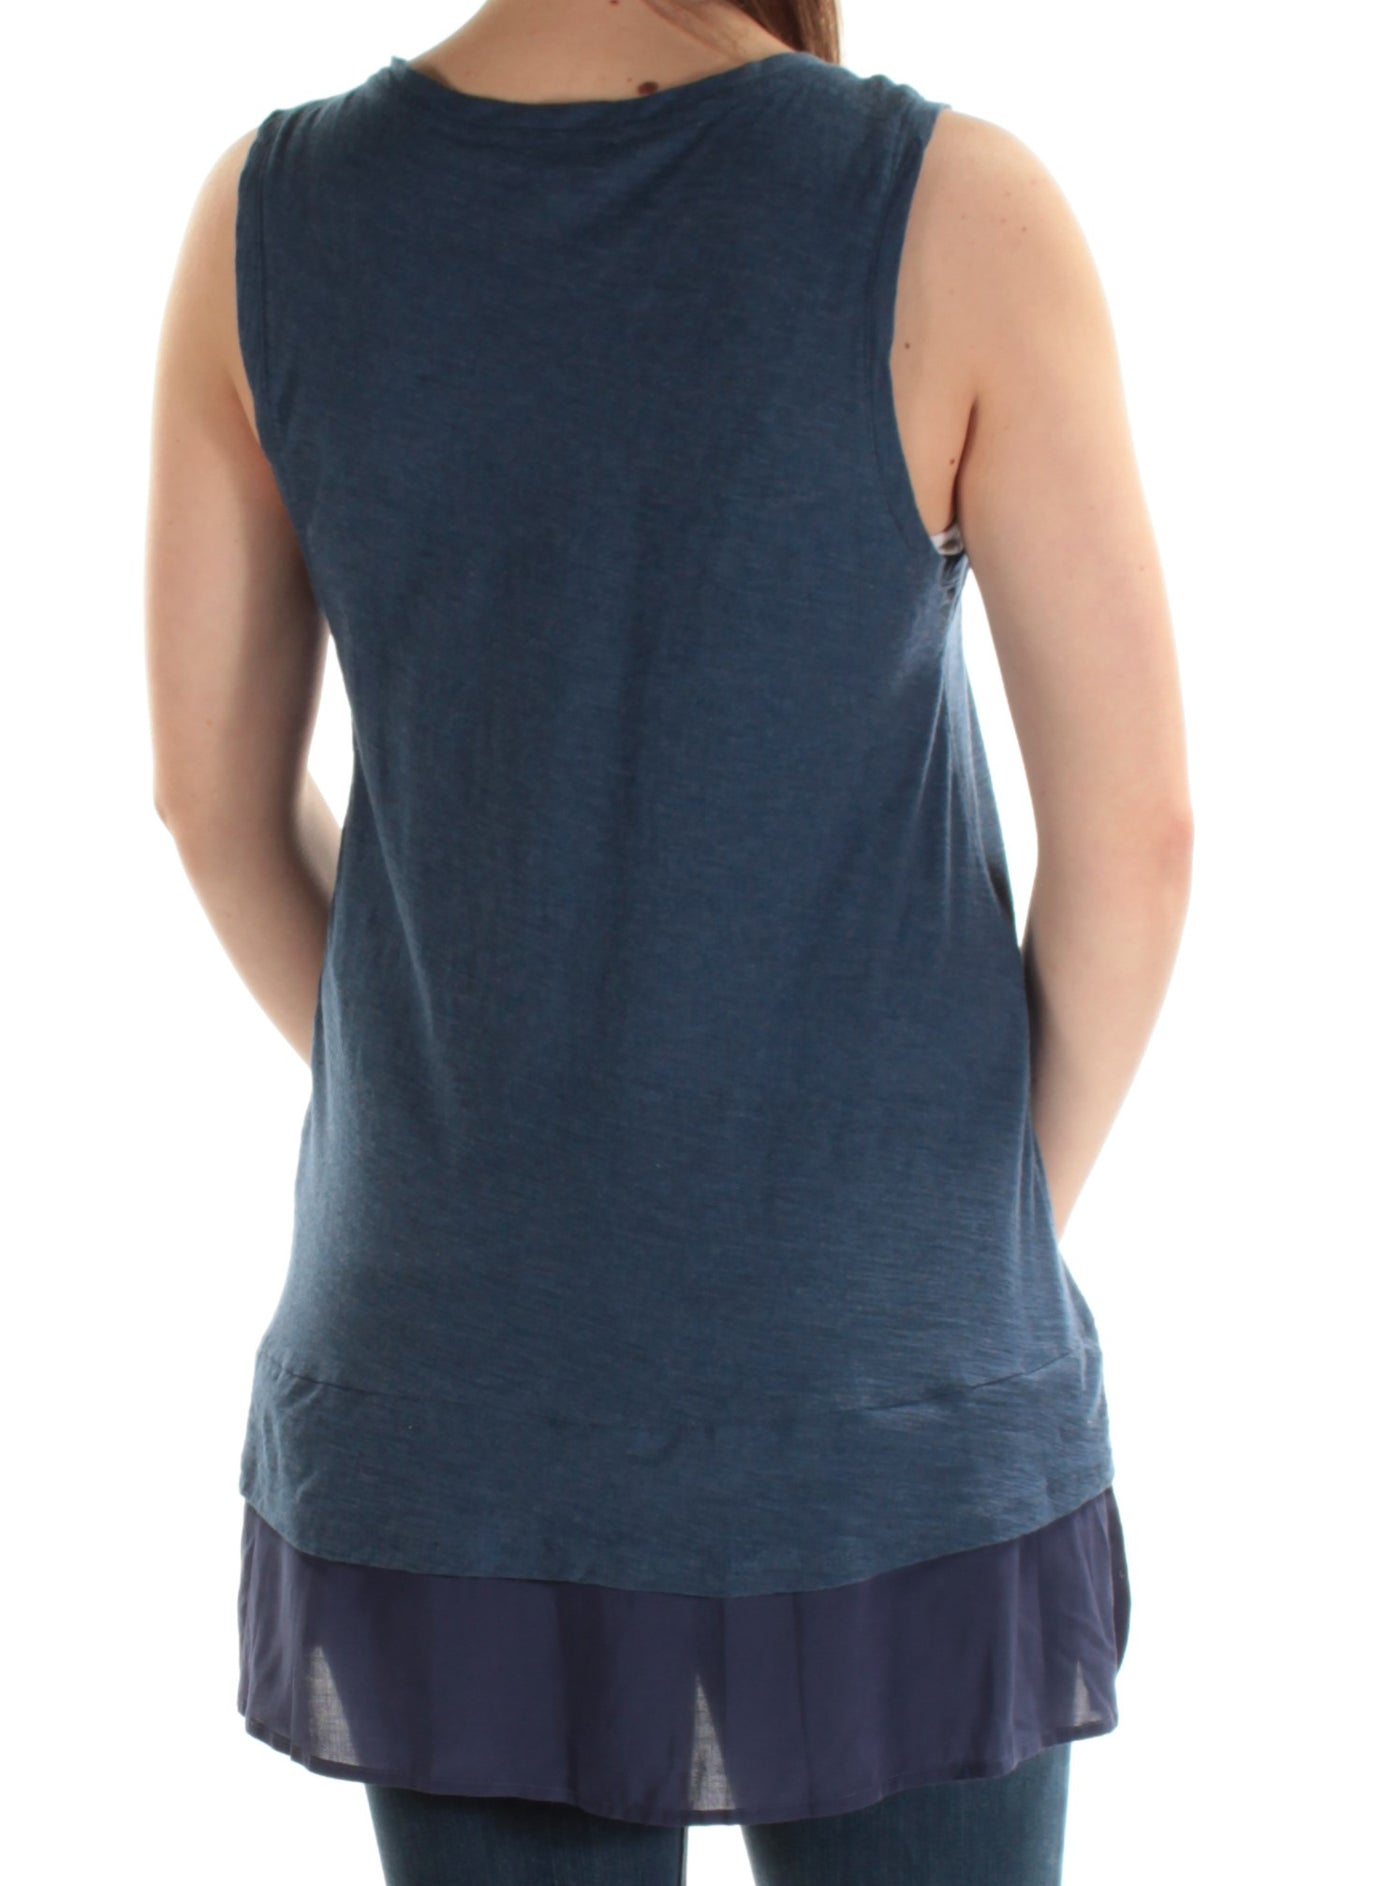 VINCE CAMUTO Womens Blue Sleeveless Scoop Neck Top